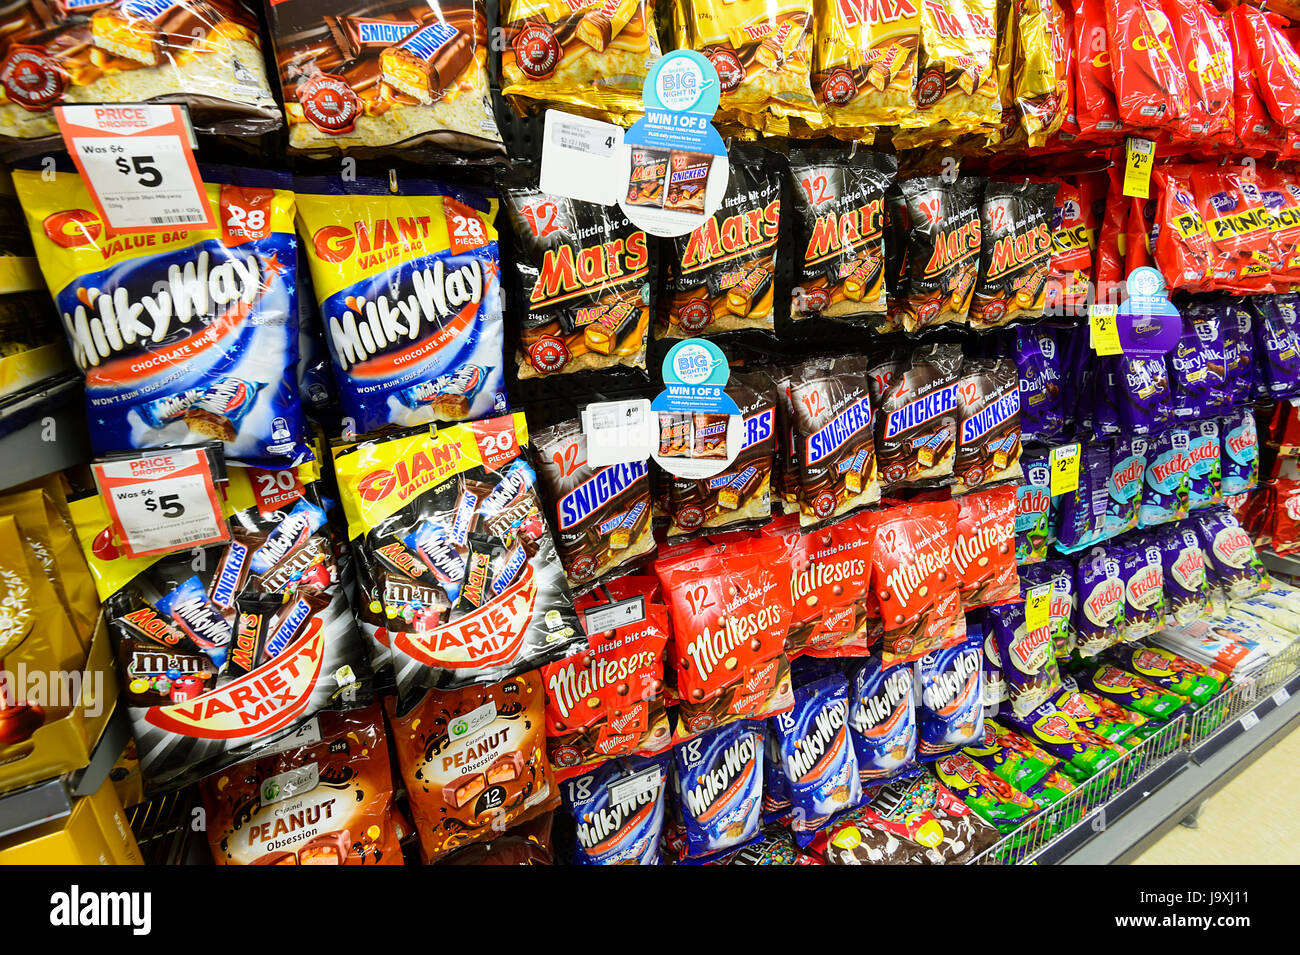 Chocolate Bars and Confectionery displayed at a supermarket, New South Wales, NSW, Australia Stock Photo